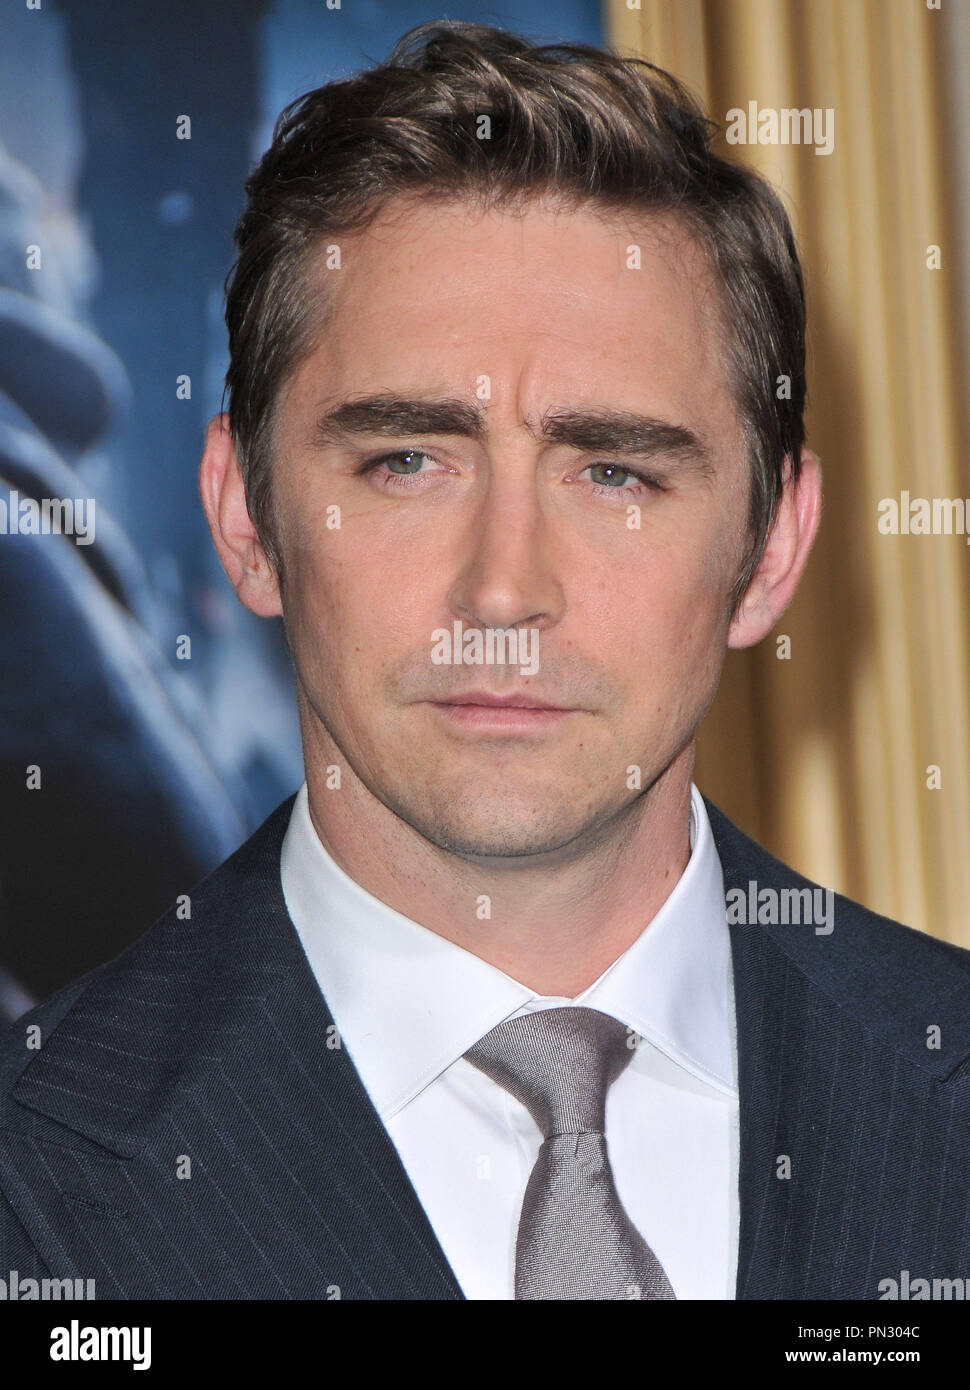 Lee pace premiere the hobbit hi-res stock photography and images - Alamy